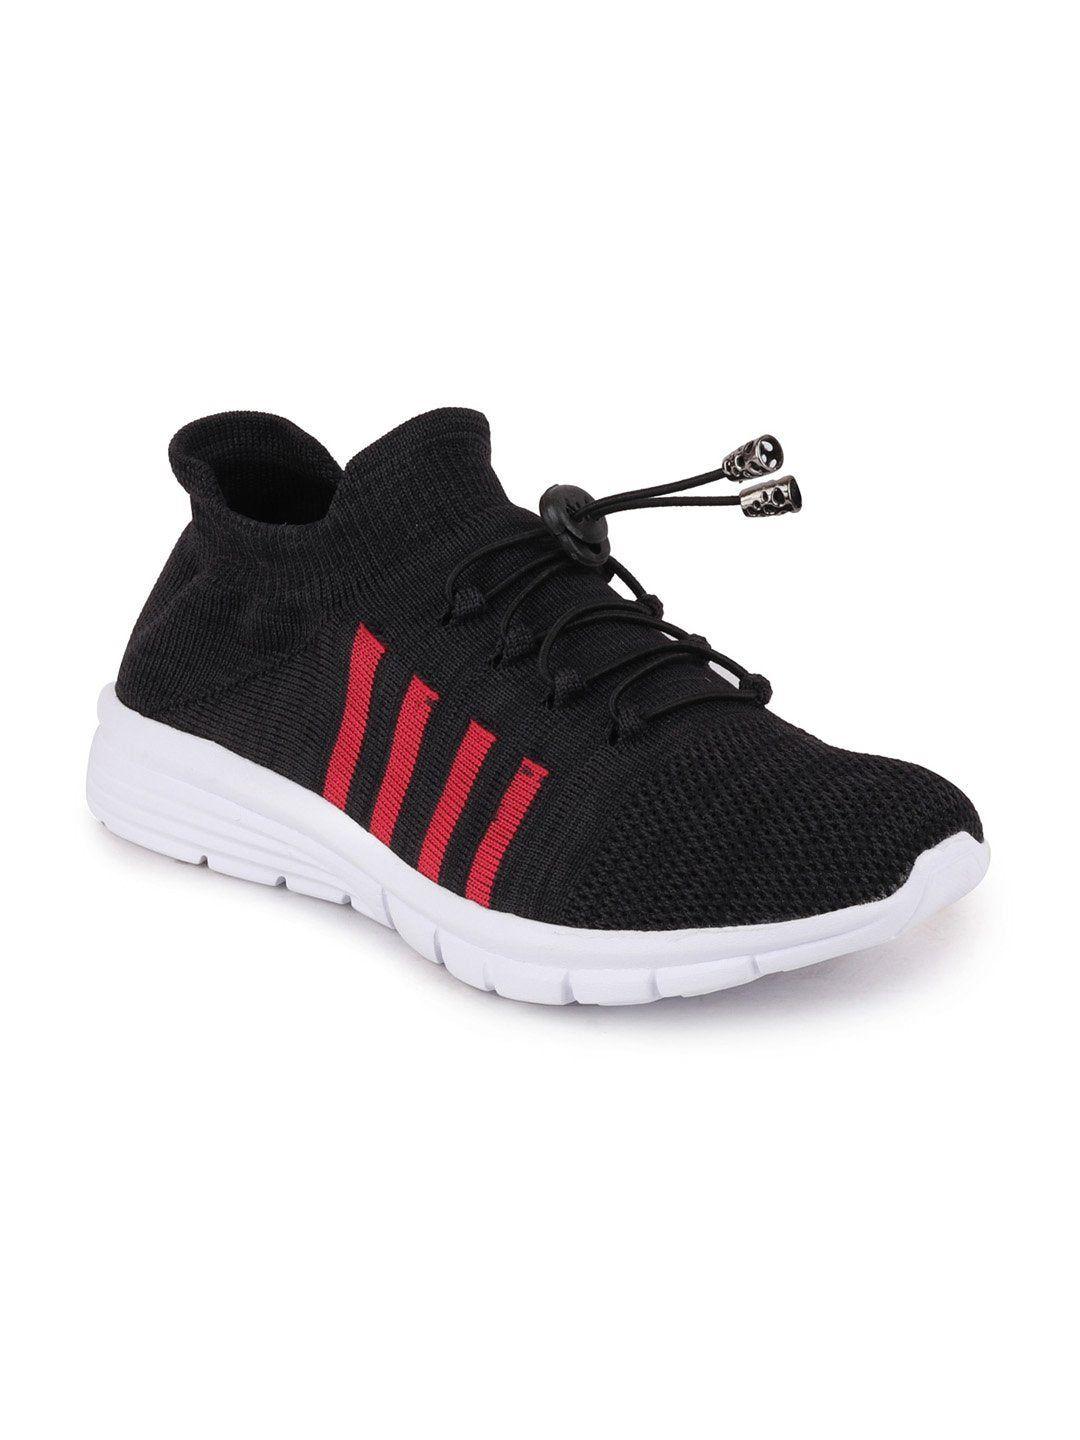 FAUSTO Men Black Mesh Running Non-Marking Lace-Up Sports Shoes